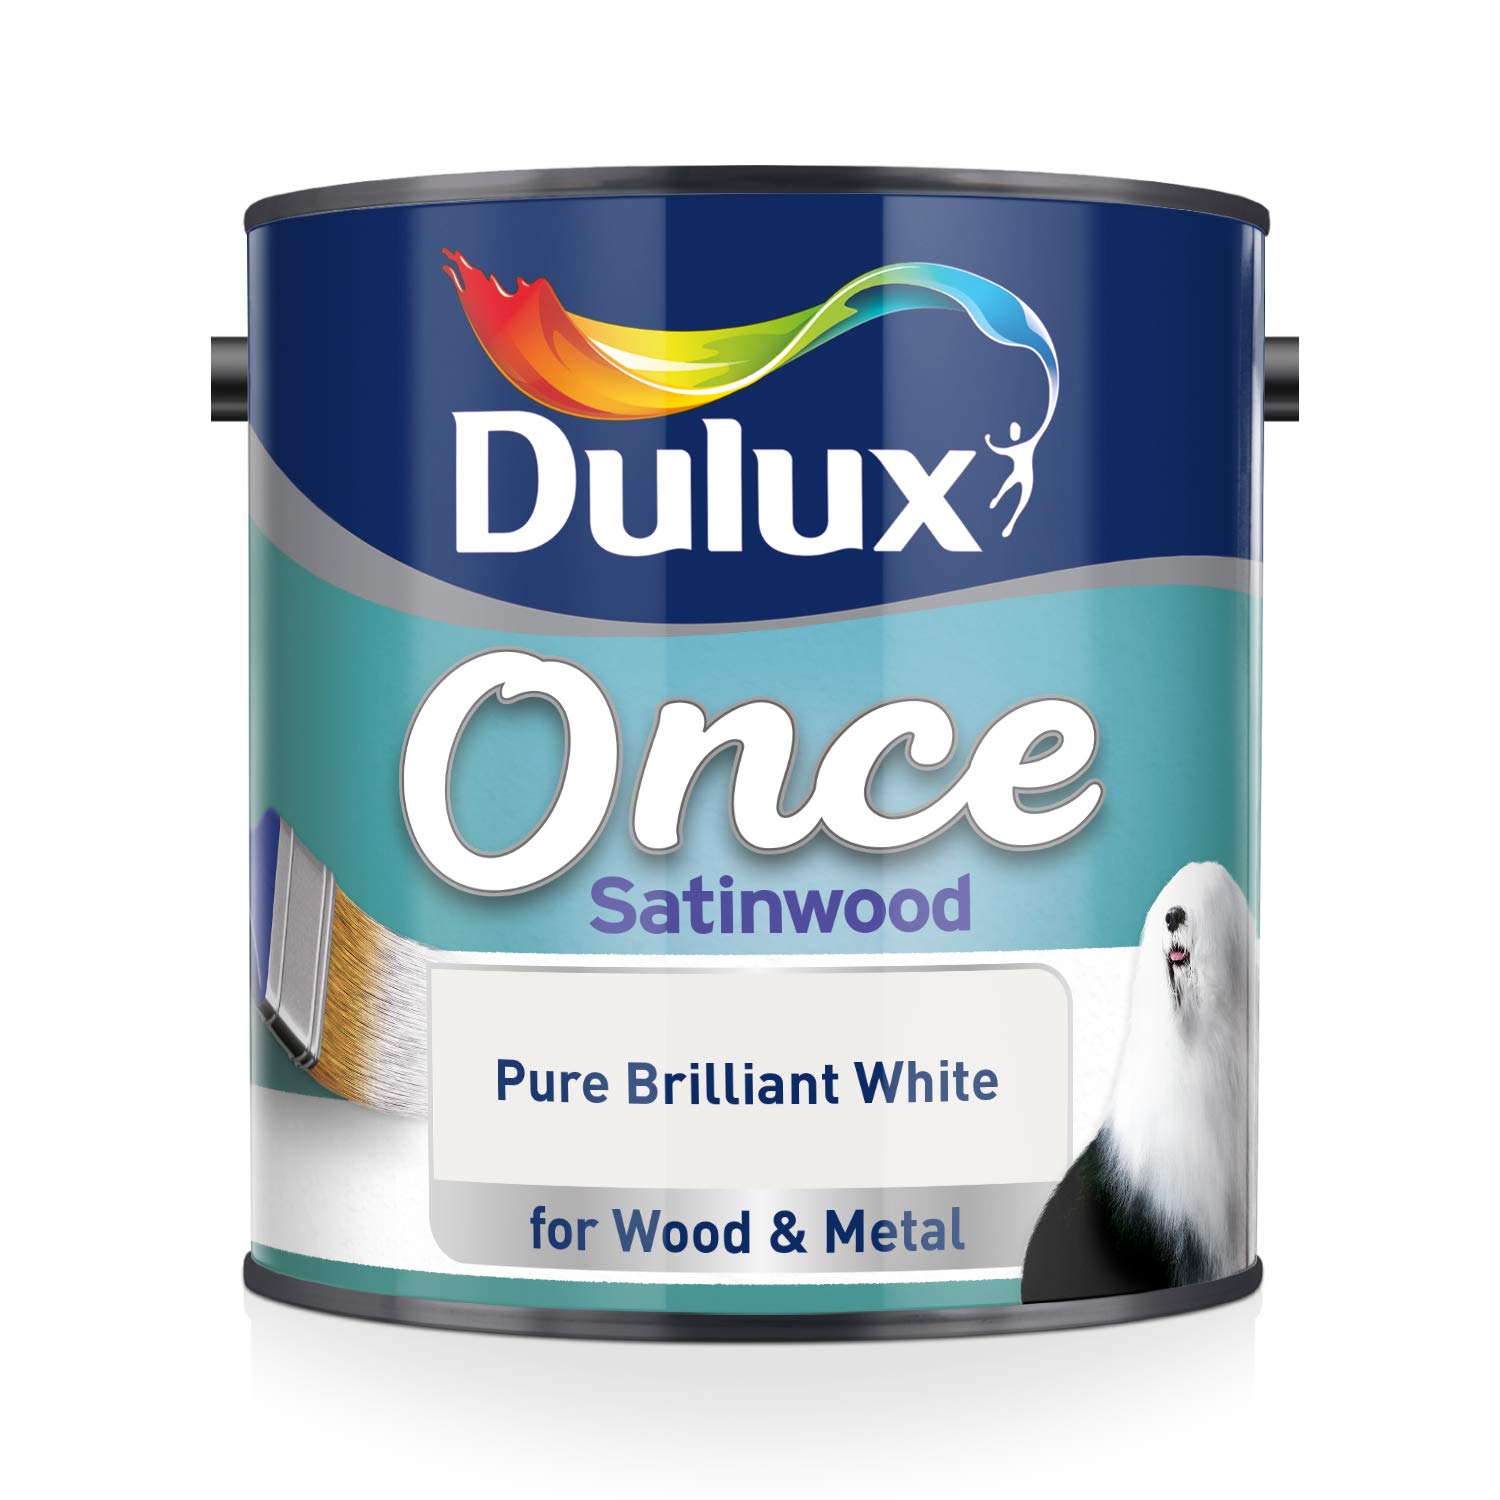 Dulux Once Satinwood in Pure Brilliant White